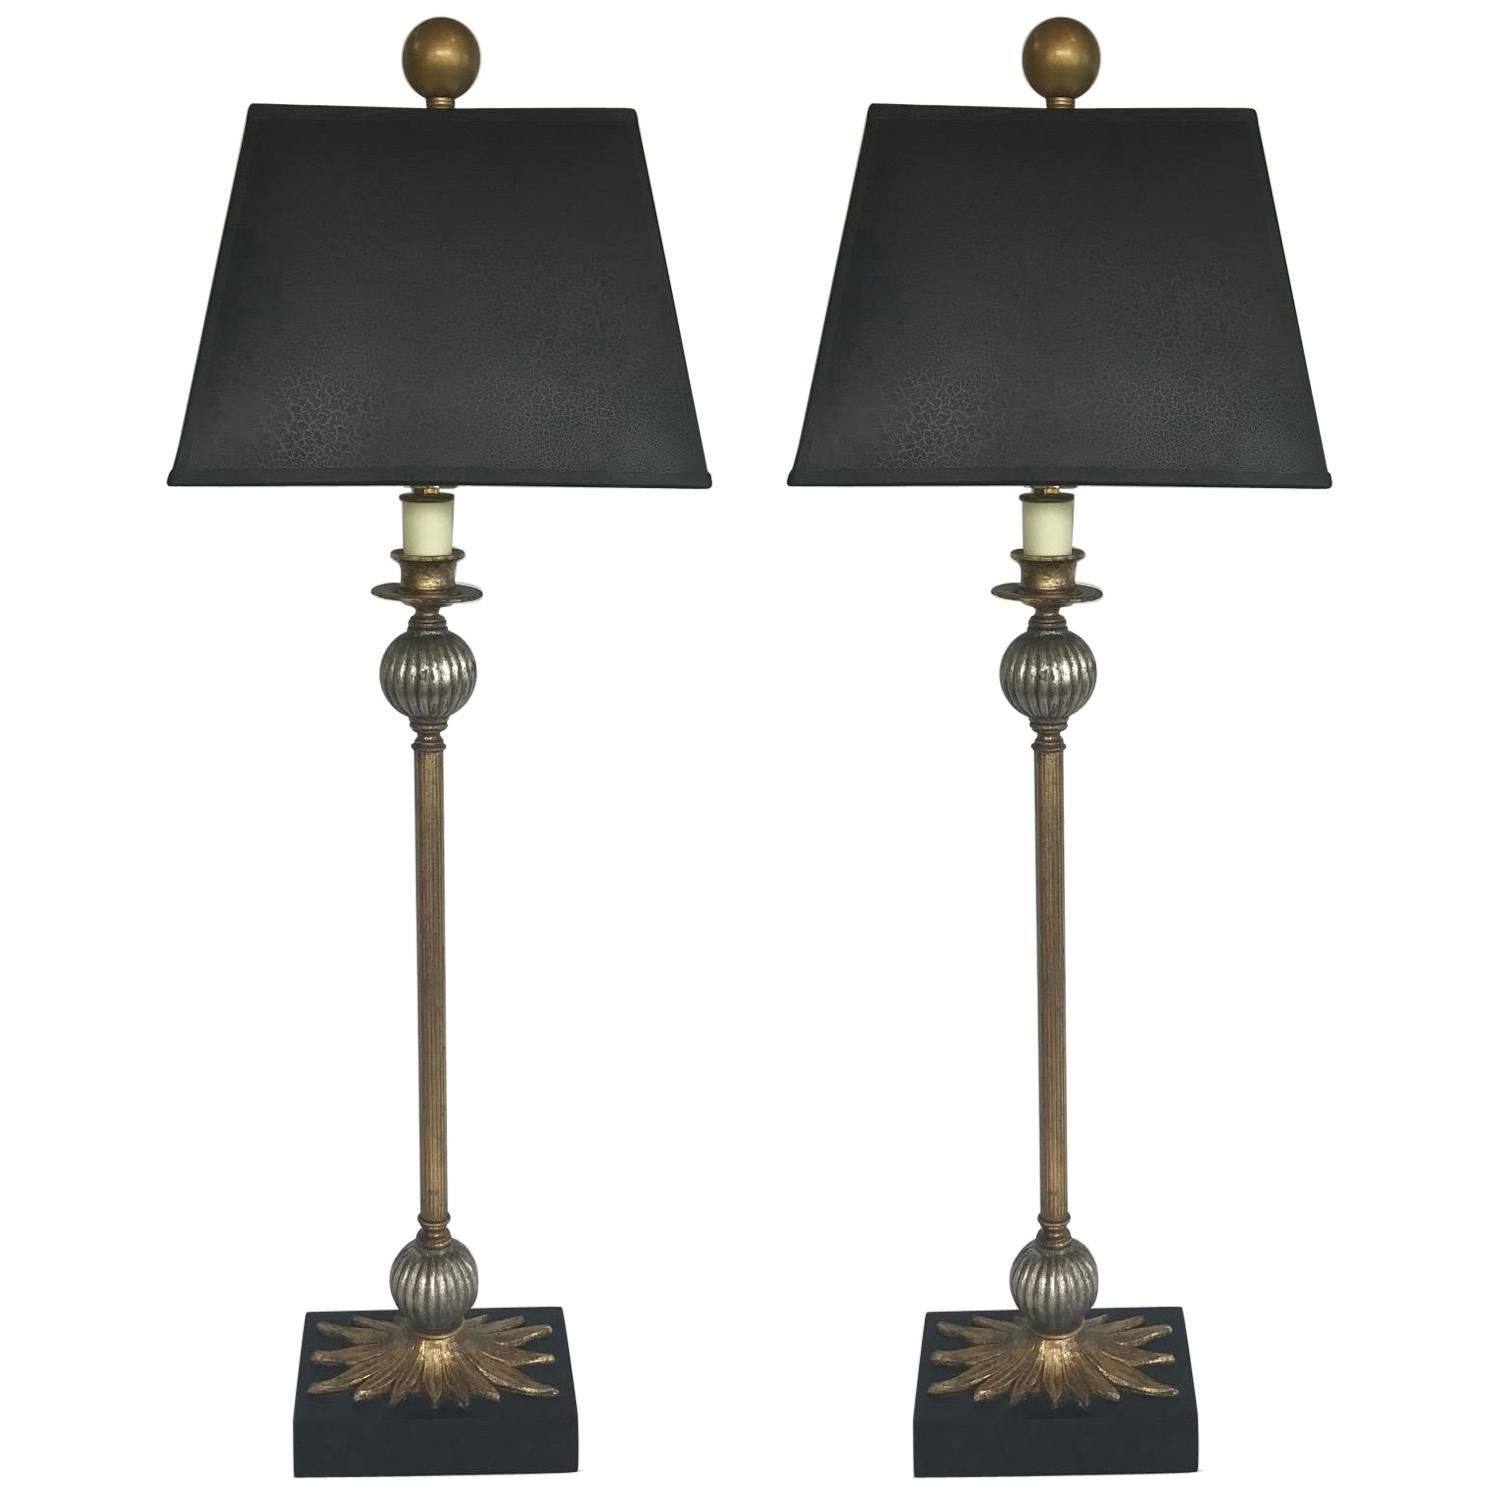 Pair of Maison Jansen Style Candlestick Lamps with Textured Shades